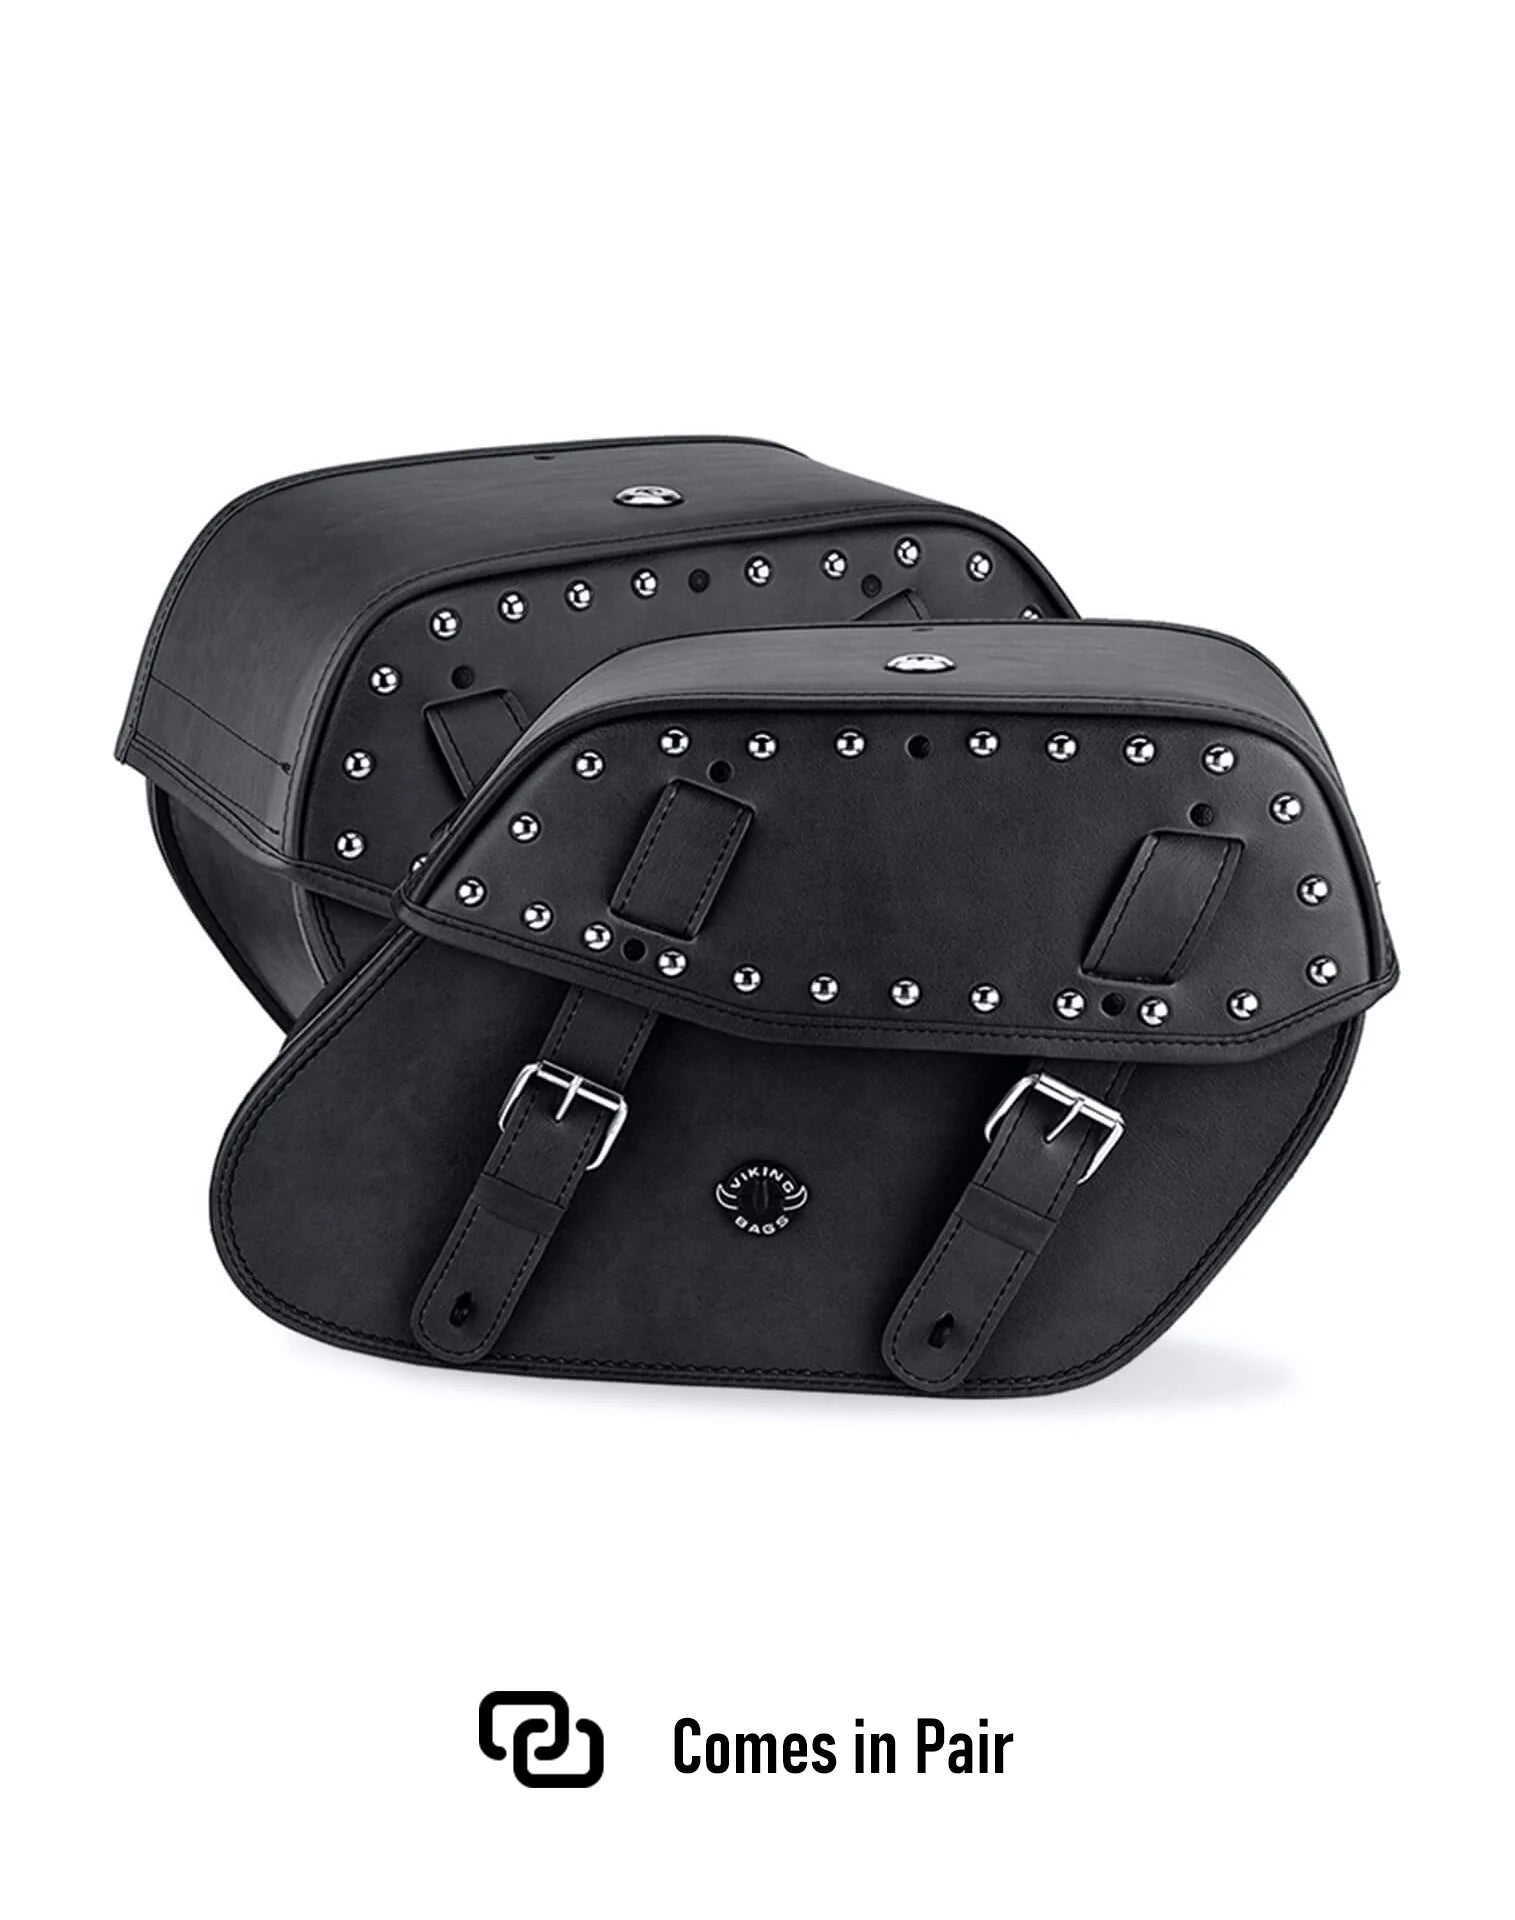 Viking Odin Large Kawasaki Vulcan 900 Classic Vn900 Studded Leather Motorcycle Saddlebags Weather Resistant Bags Comes in Pair